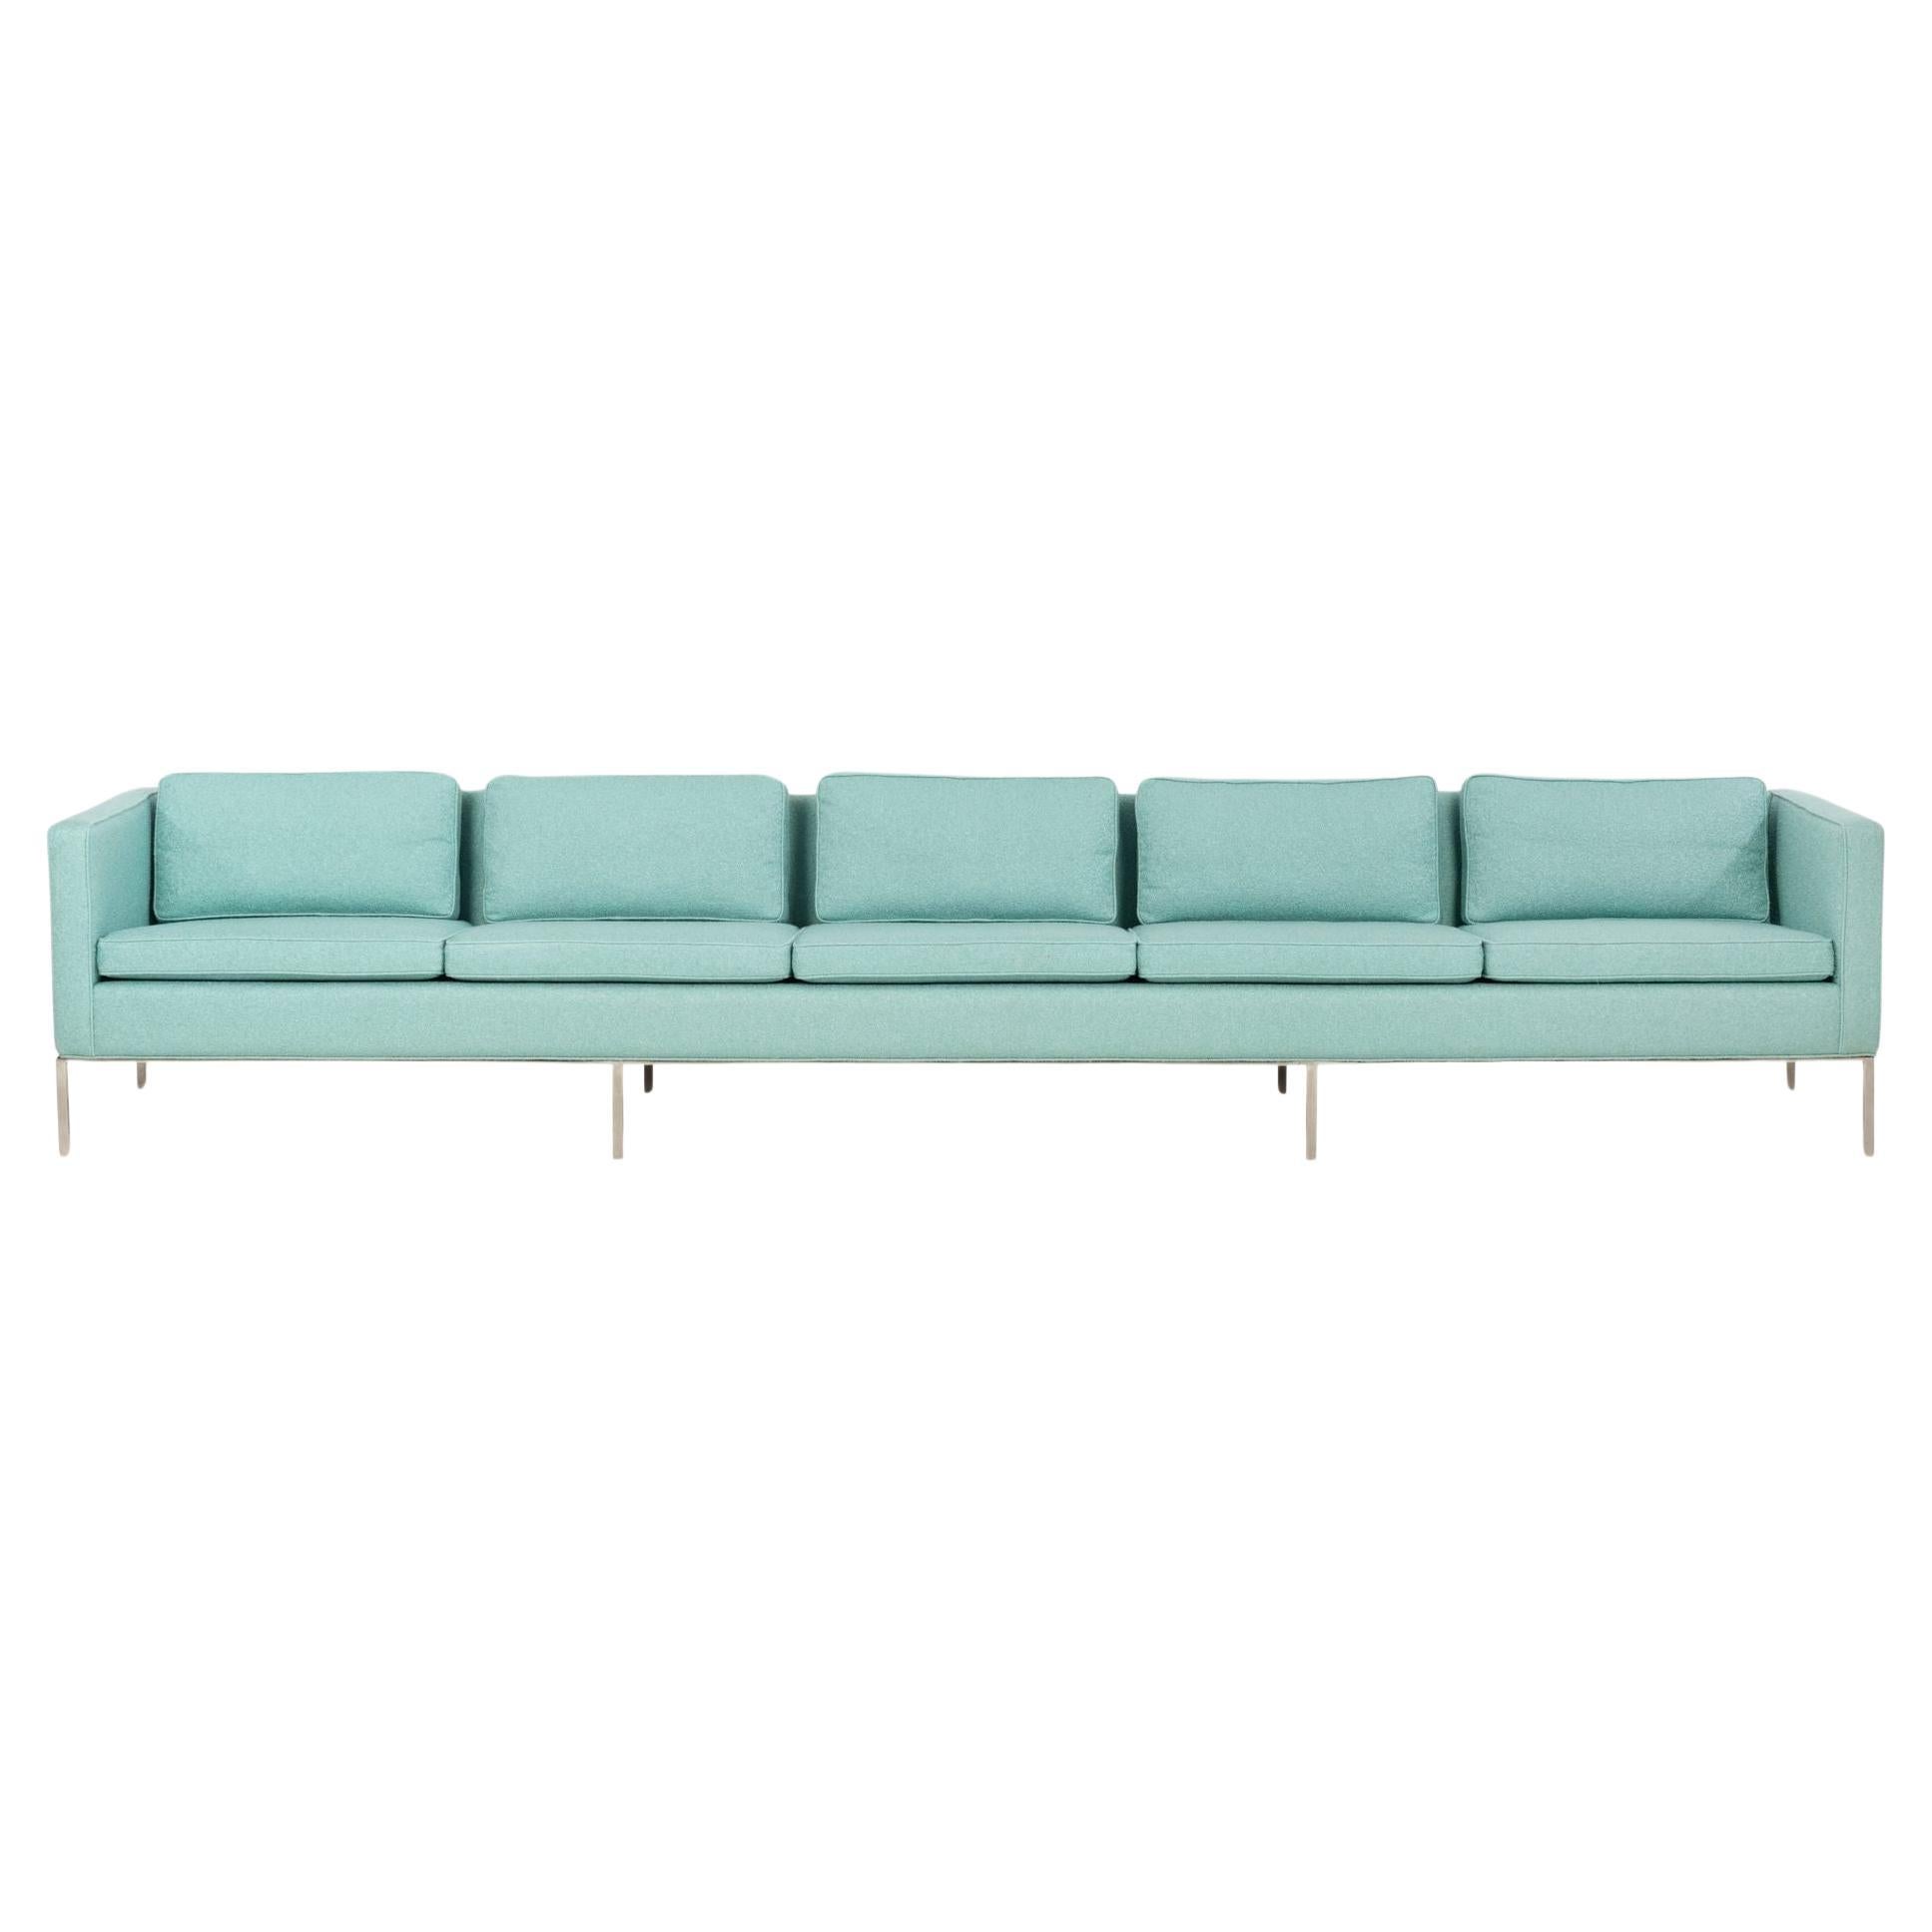 William Armbruster Custom Monumental five-seat Sofa for Chase Manhattan For Sale